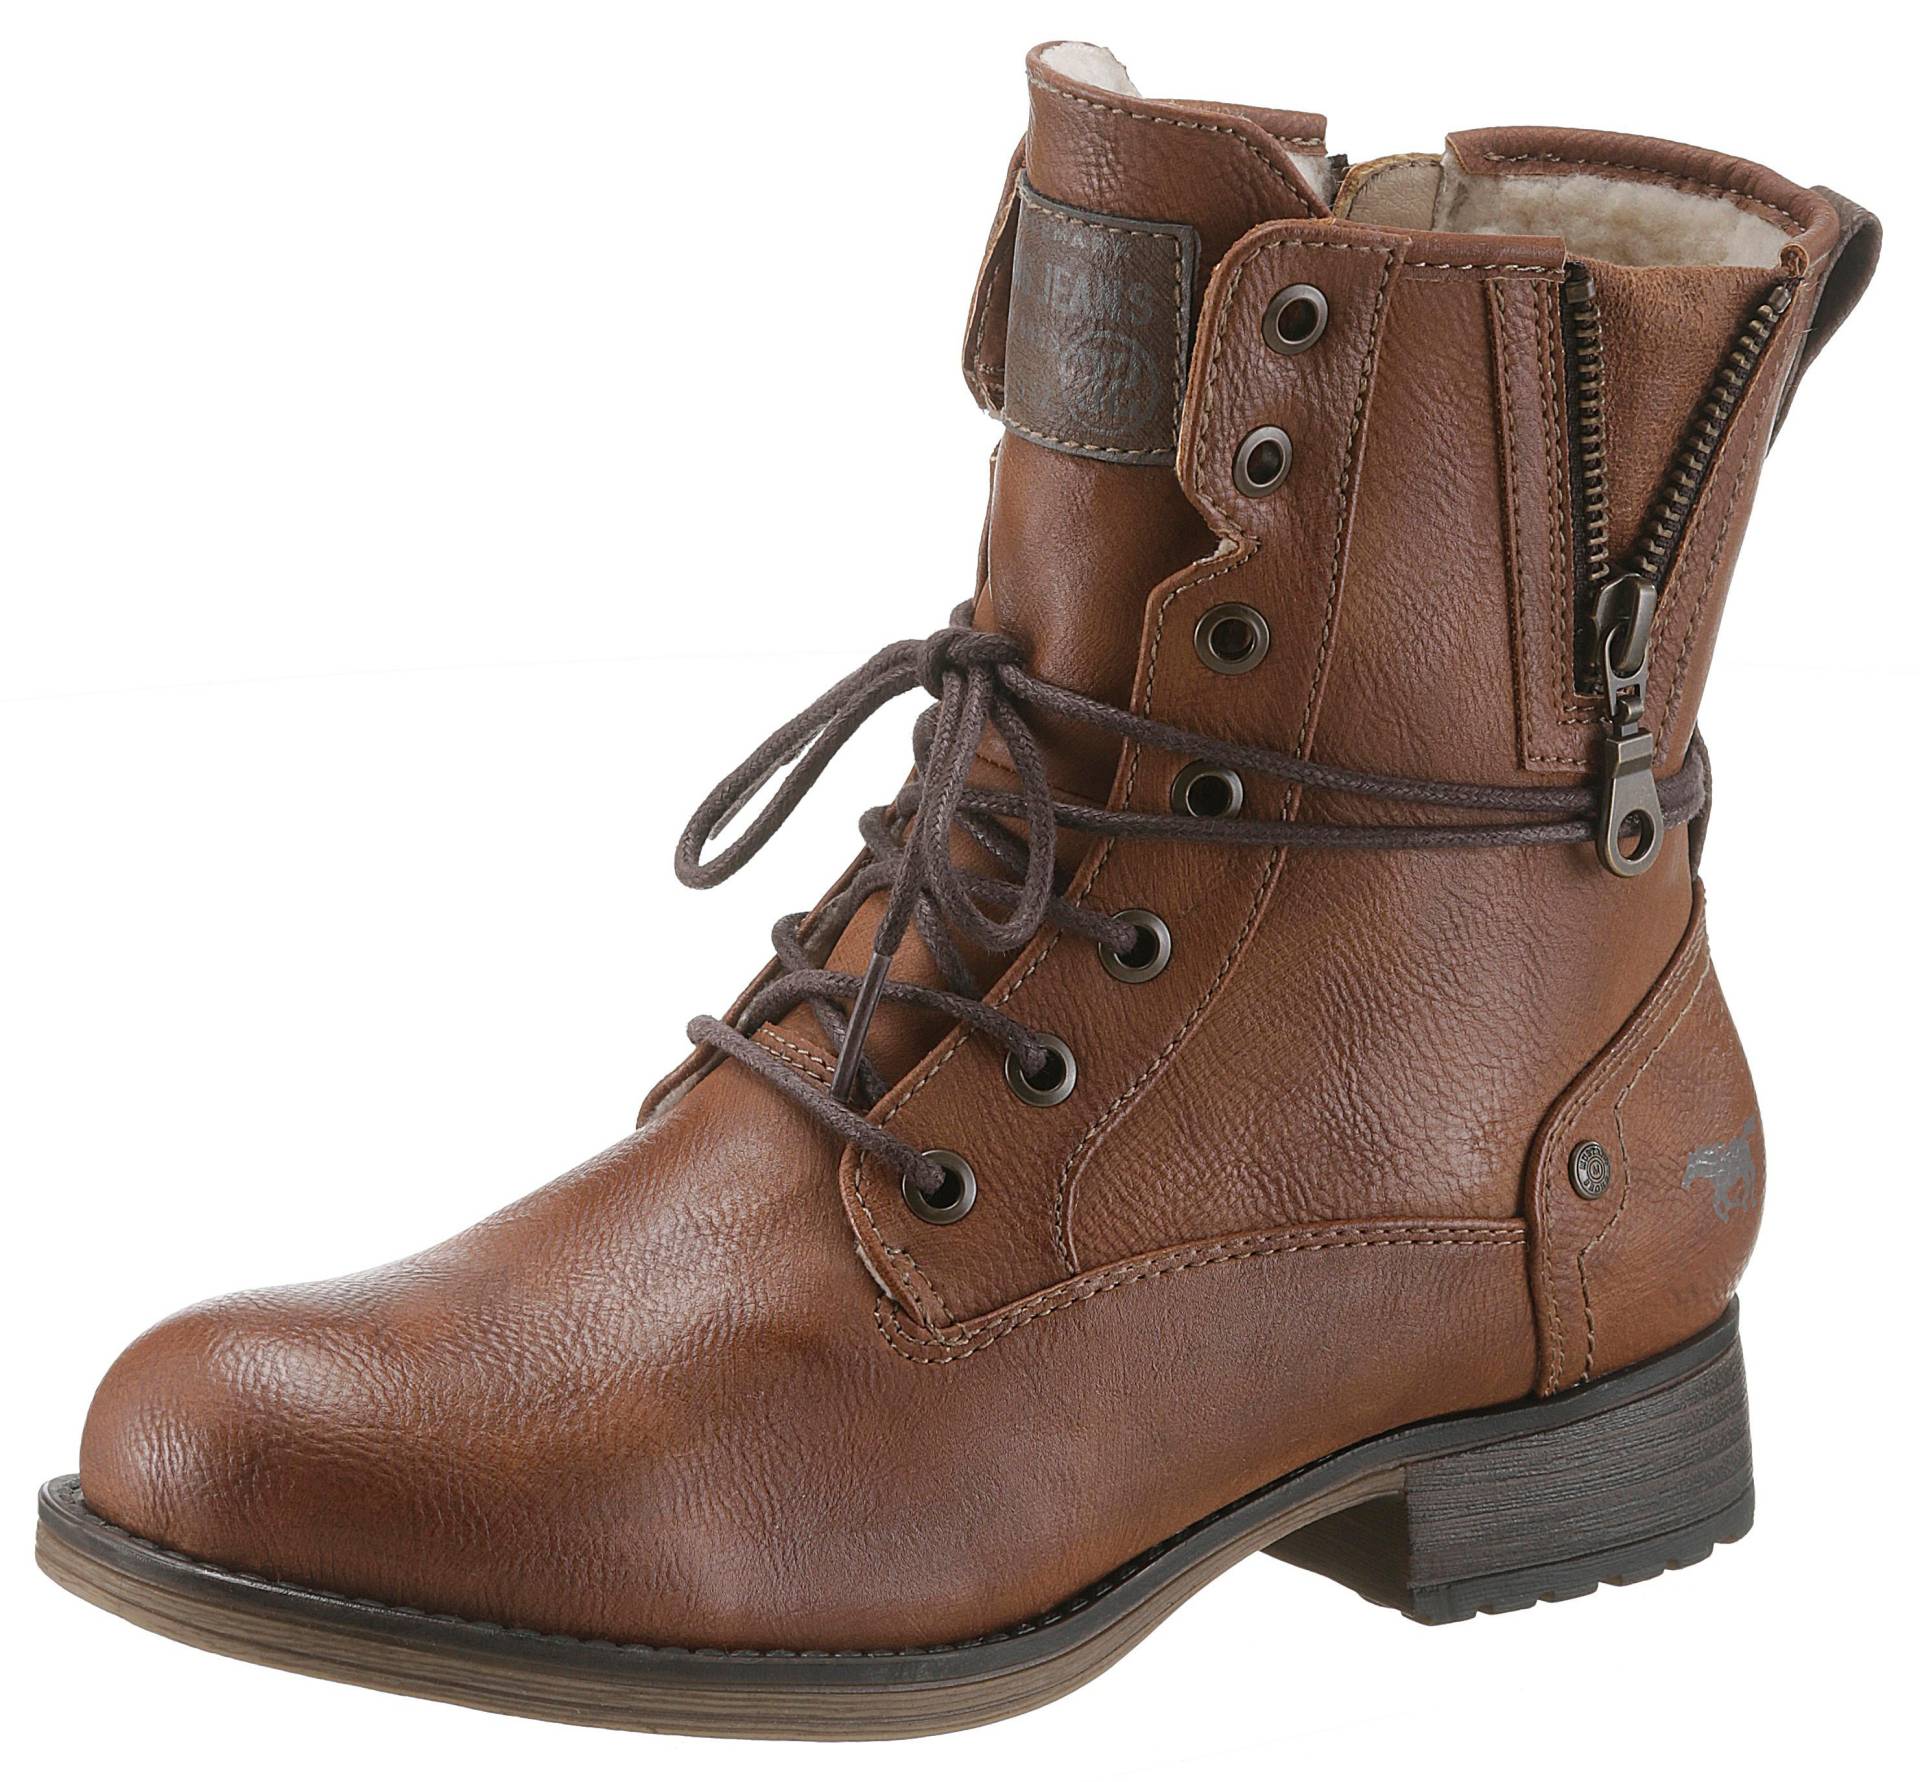 Mustang Shoes Winterboots von Mustang Shoes